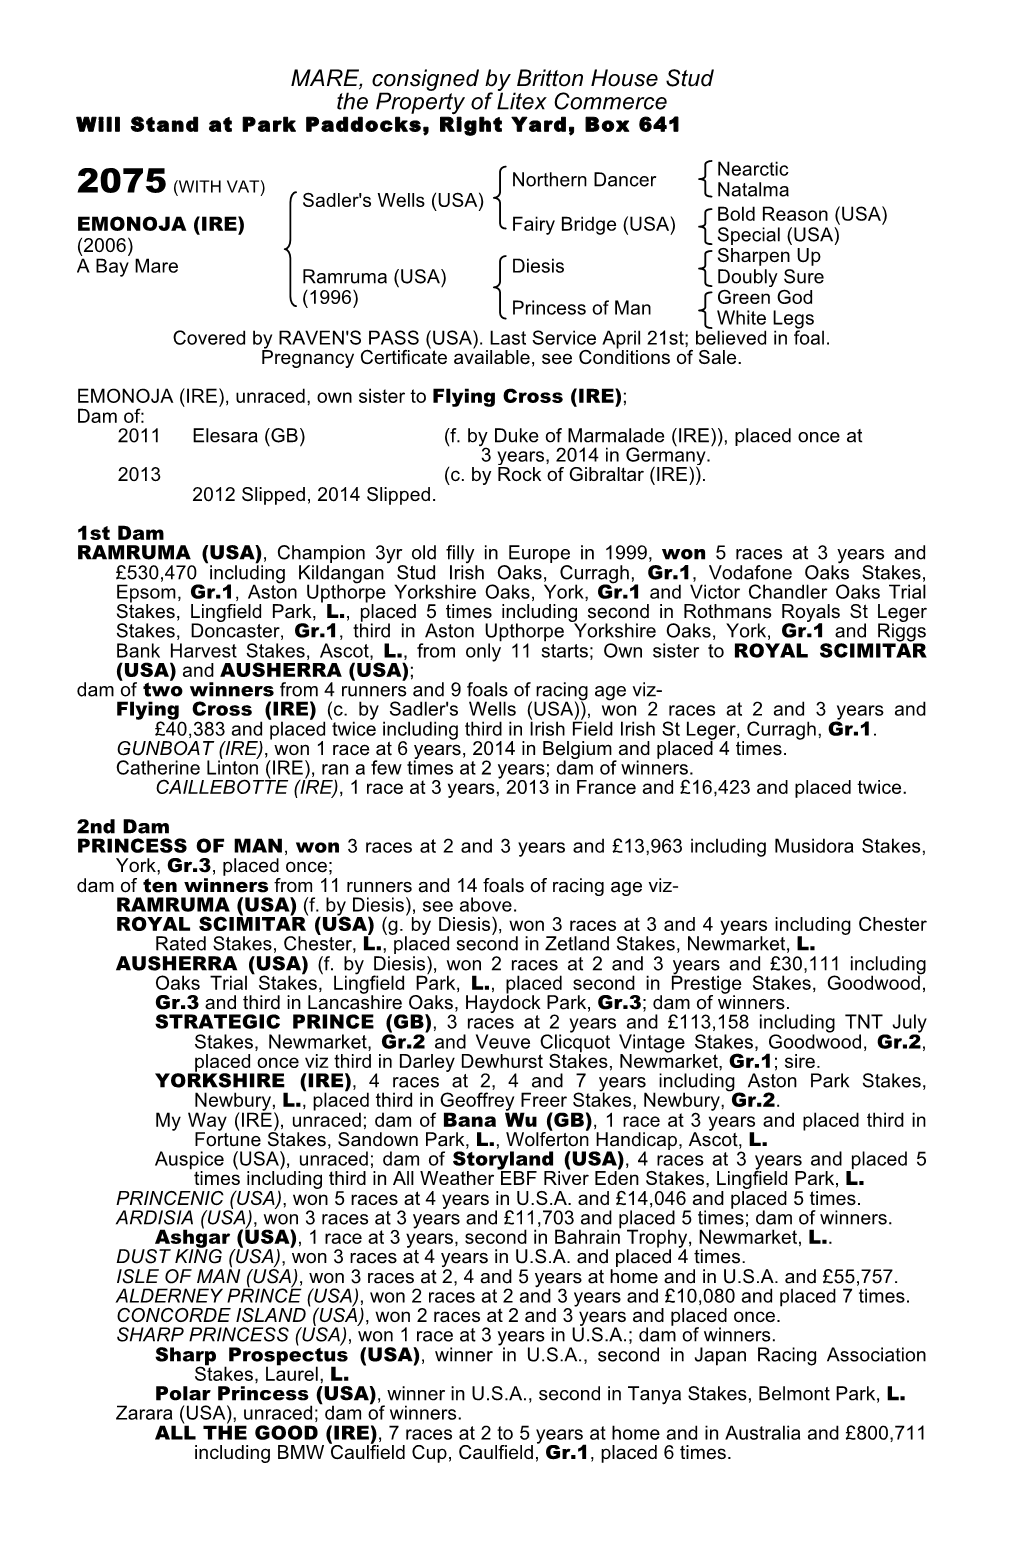 MARE, Consigned by Britton House Stud the Property of Litex Commerce Will Stand at Park Paddocks, Right Yard, Box 641